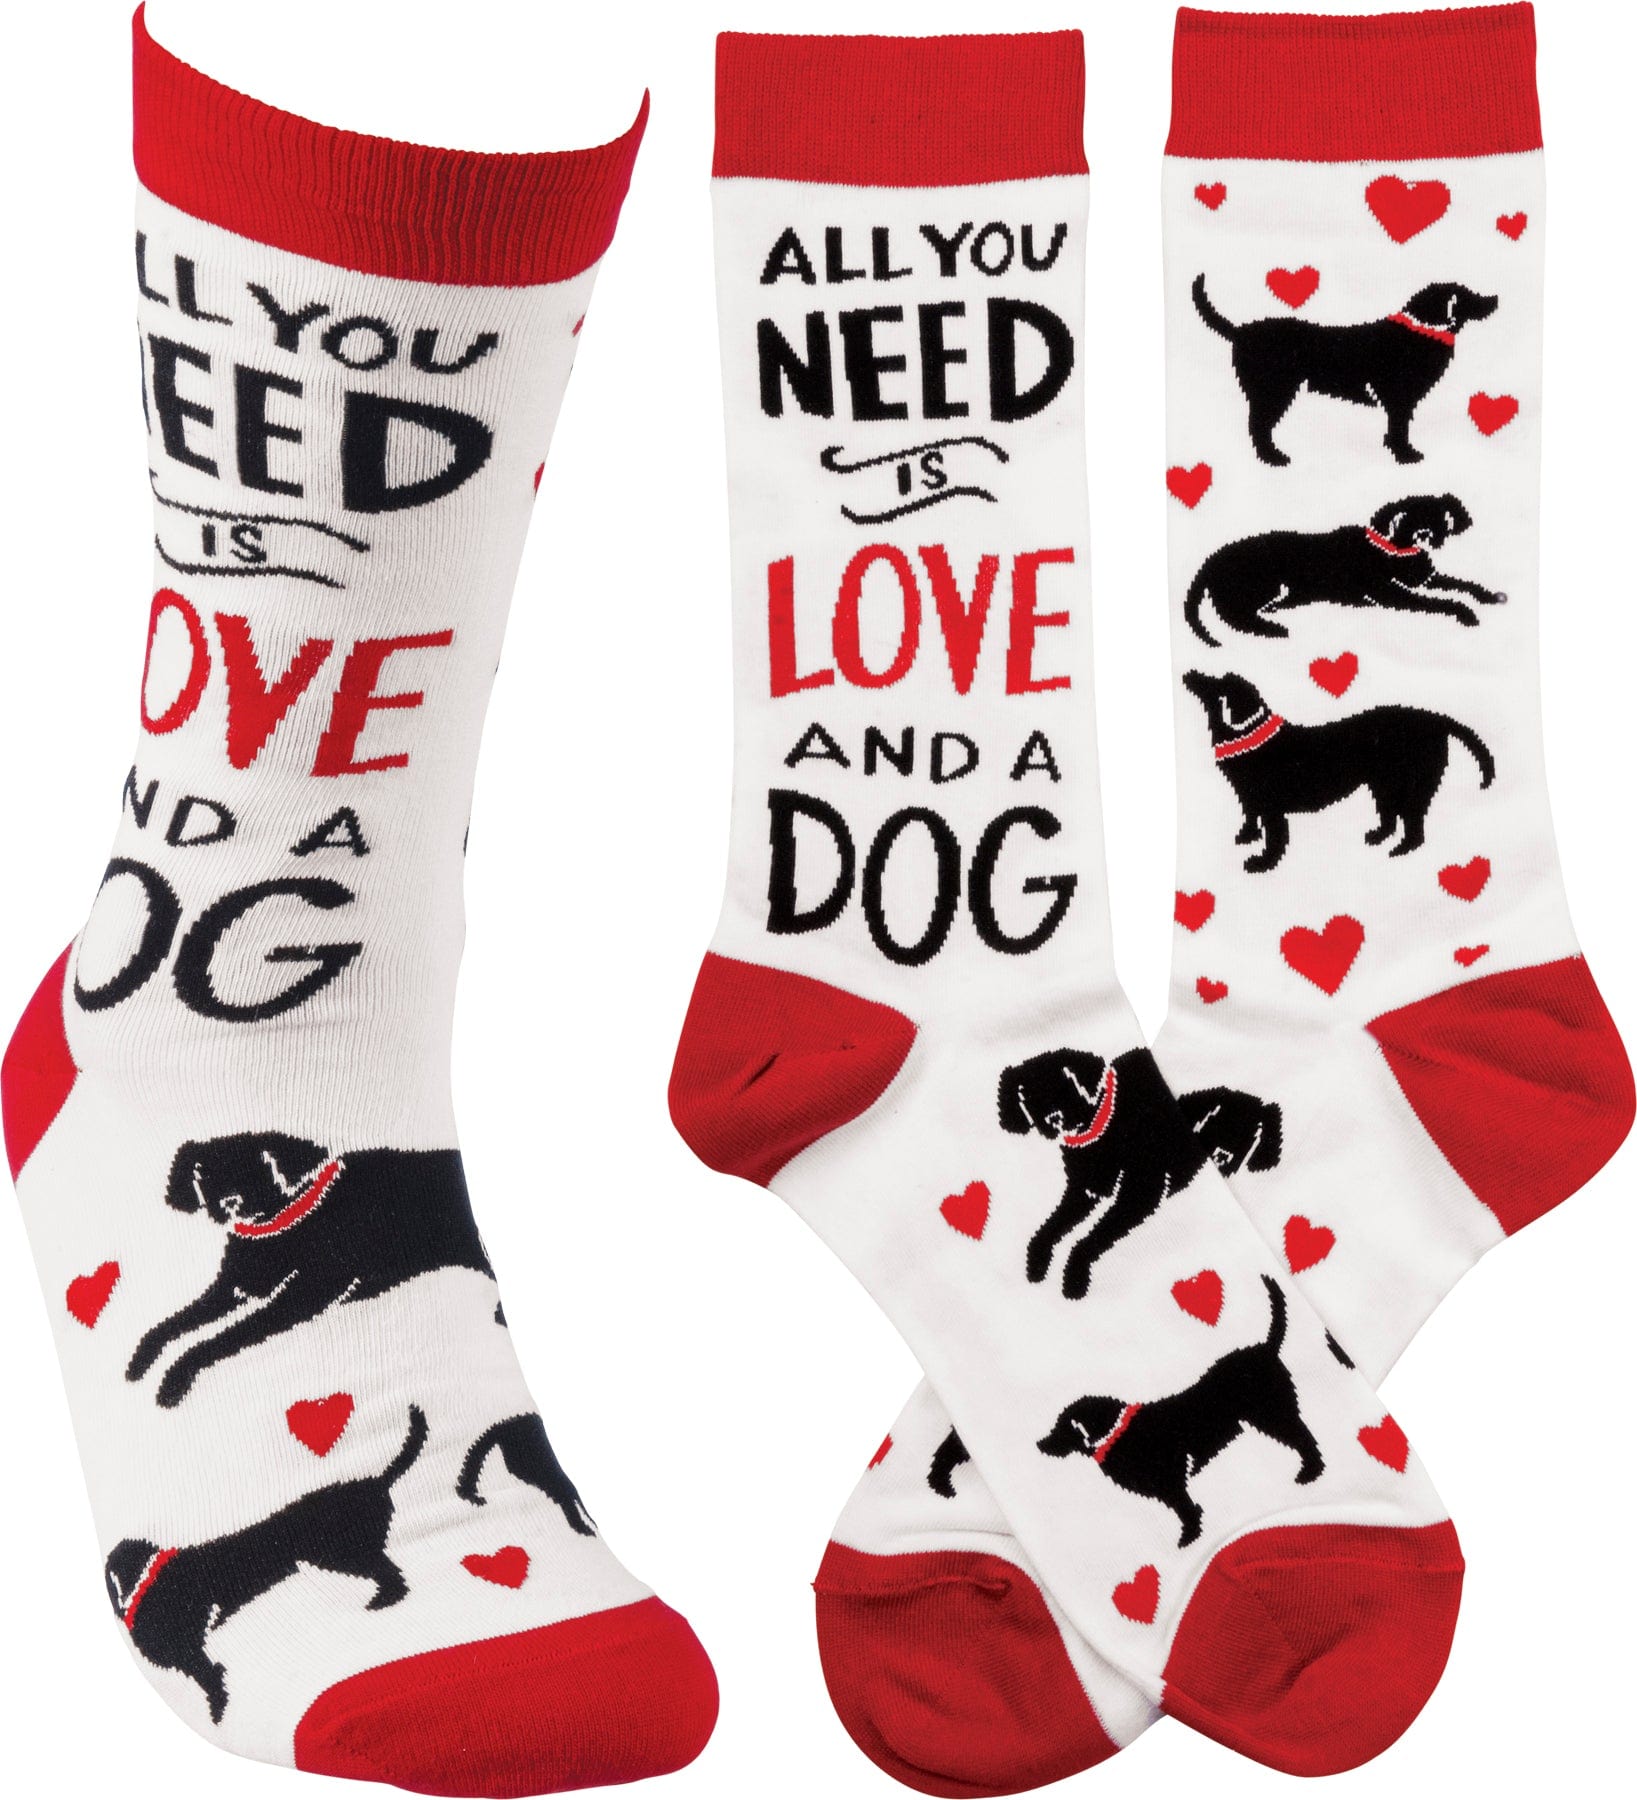 Socks One Size Fits Most Socks - All You Need Is Love And A Dog PBK-34678